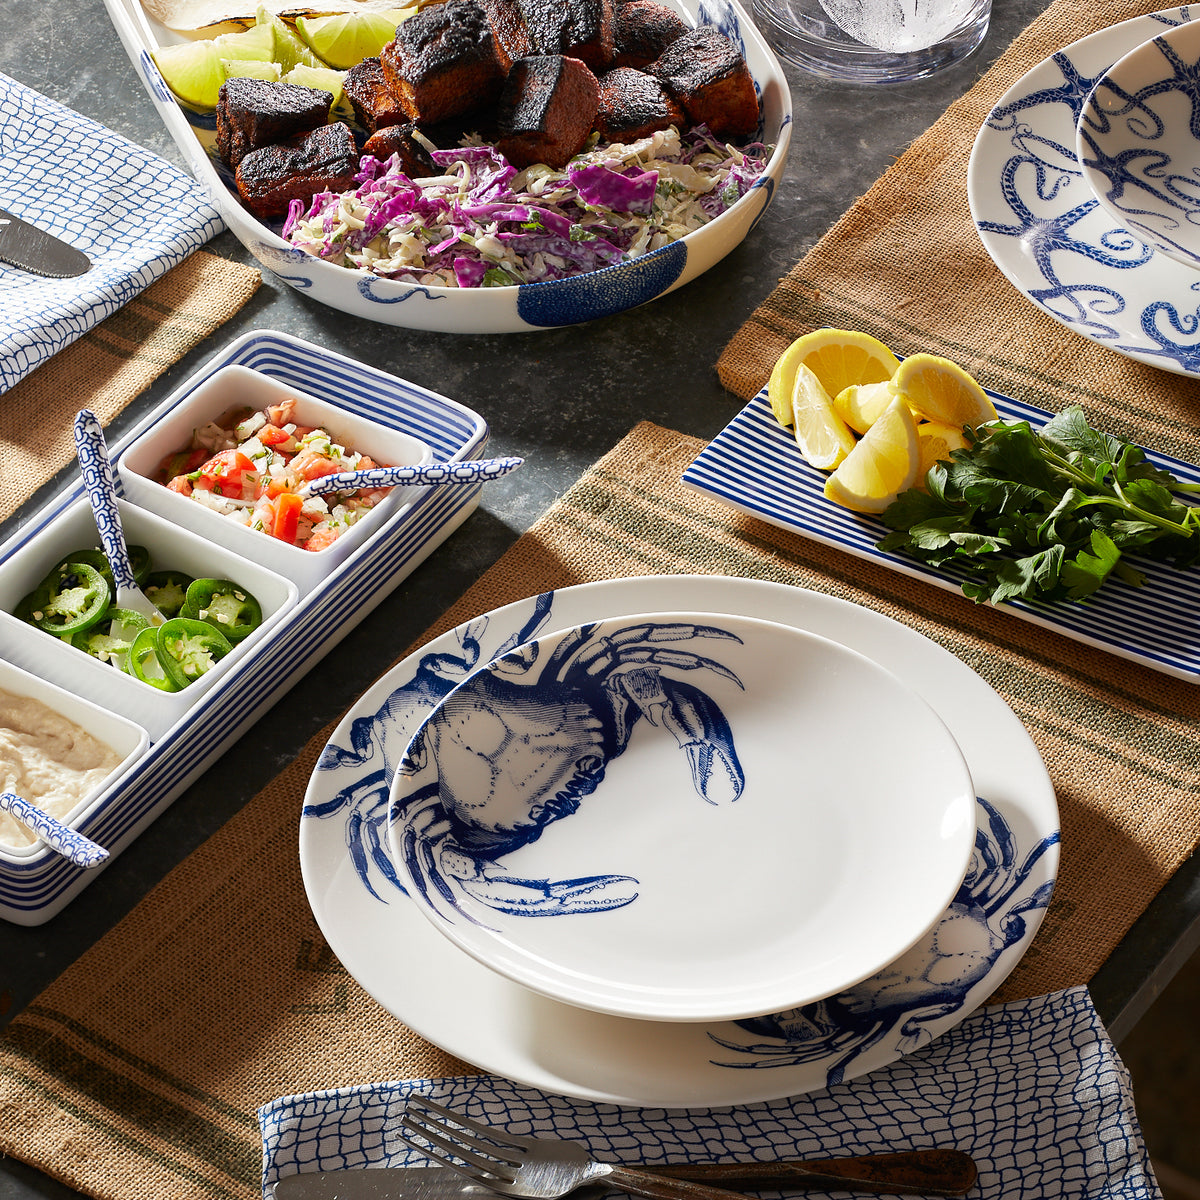 A dining table setting featuring premium Caskata Artisanal Home Crab Coupe Salad Plate with a blue crab pattern, a platter of food with charred items, side dishes including sliced peppers and a green herb, and a bowl with lime and lemon wedges.